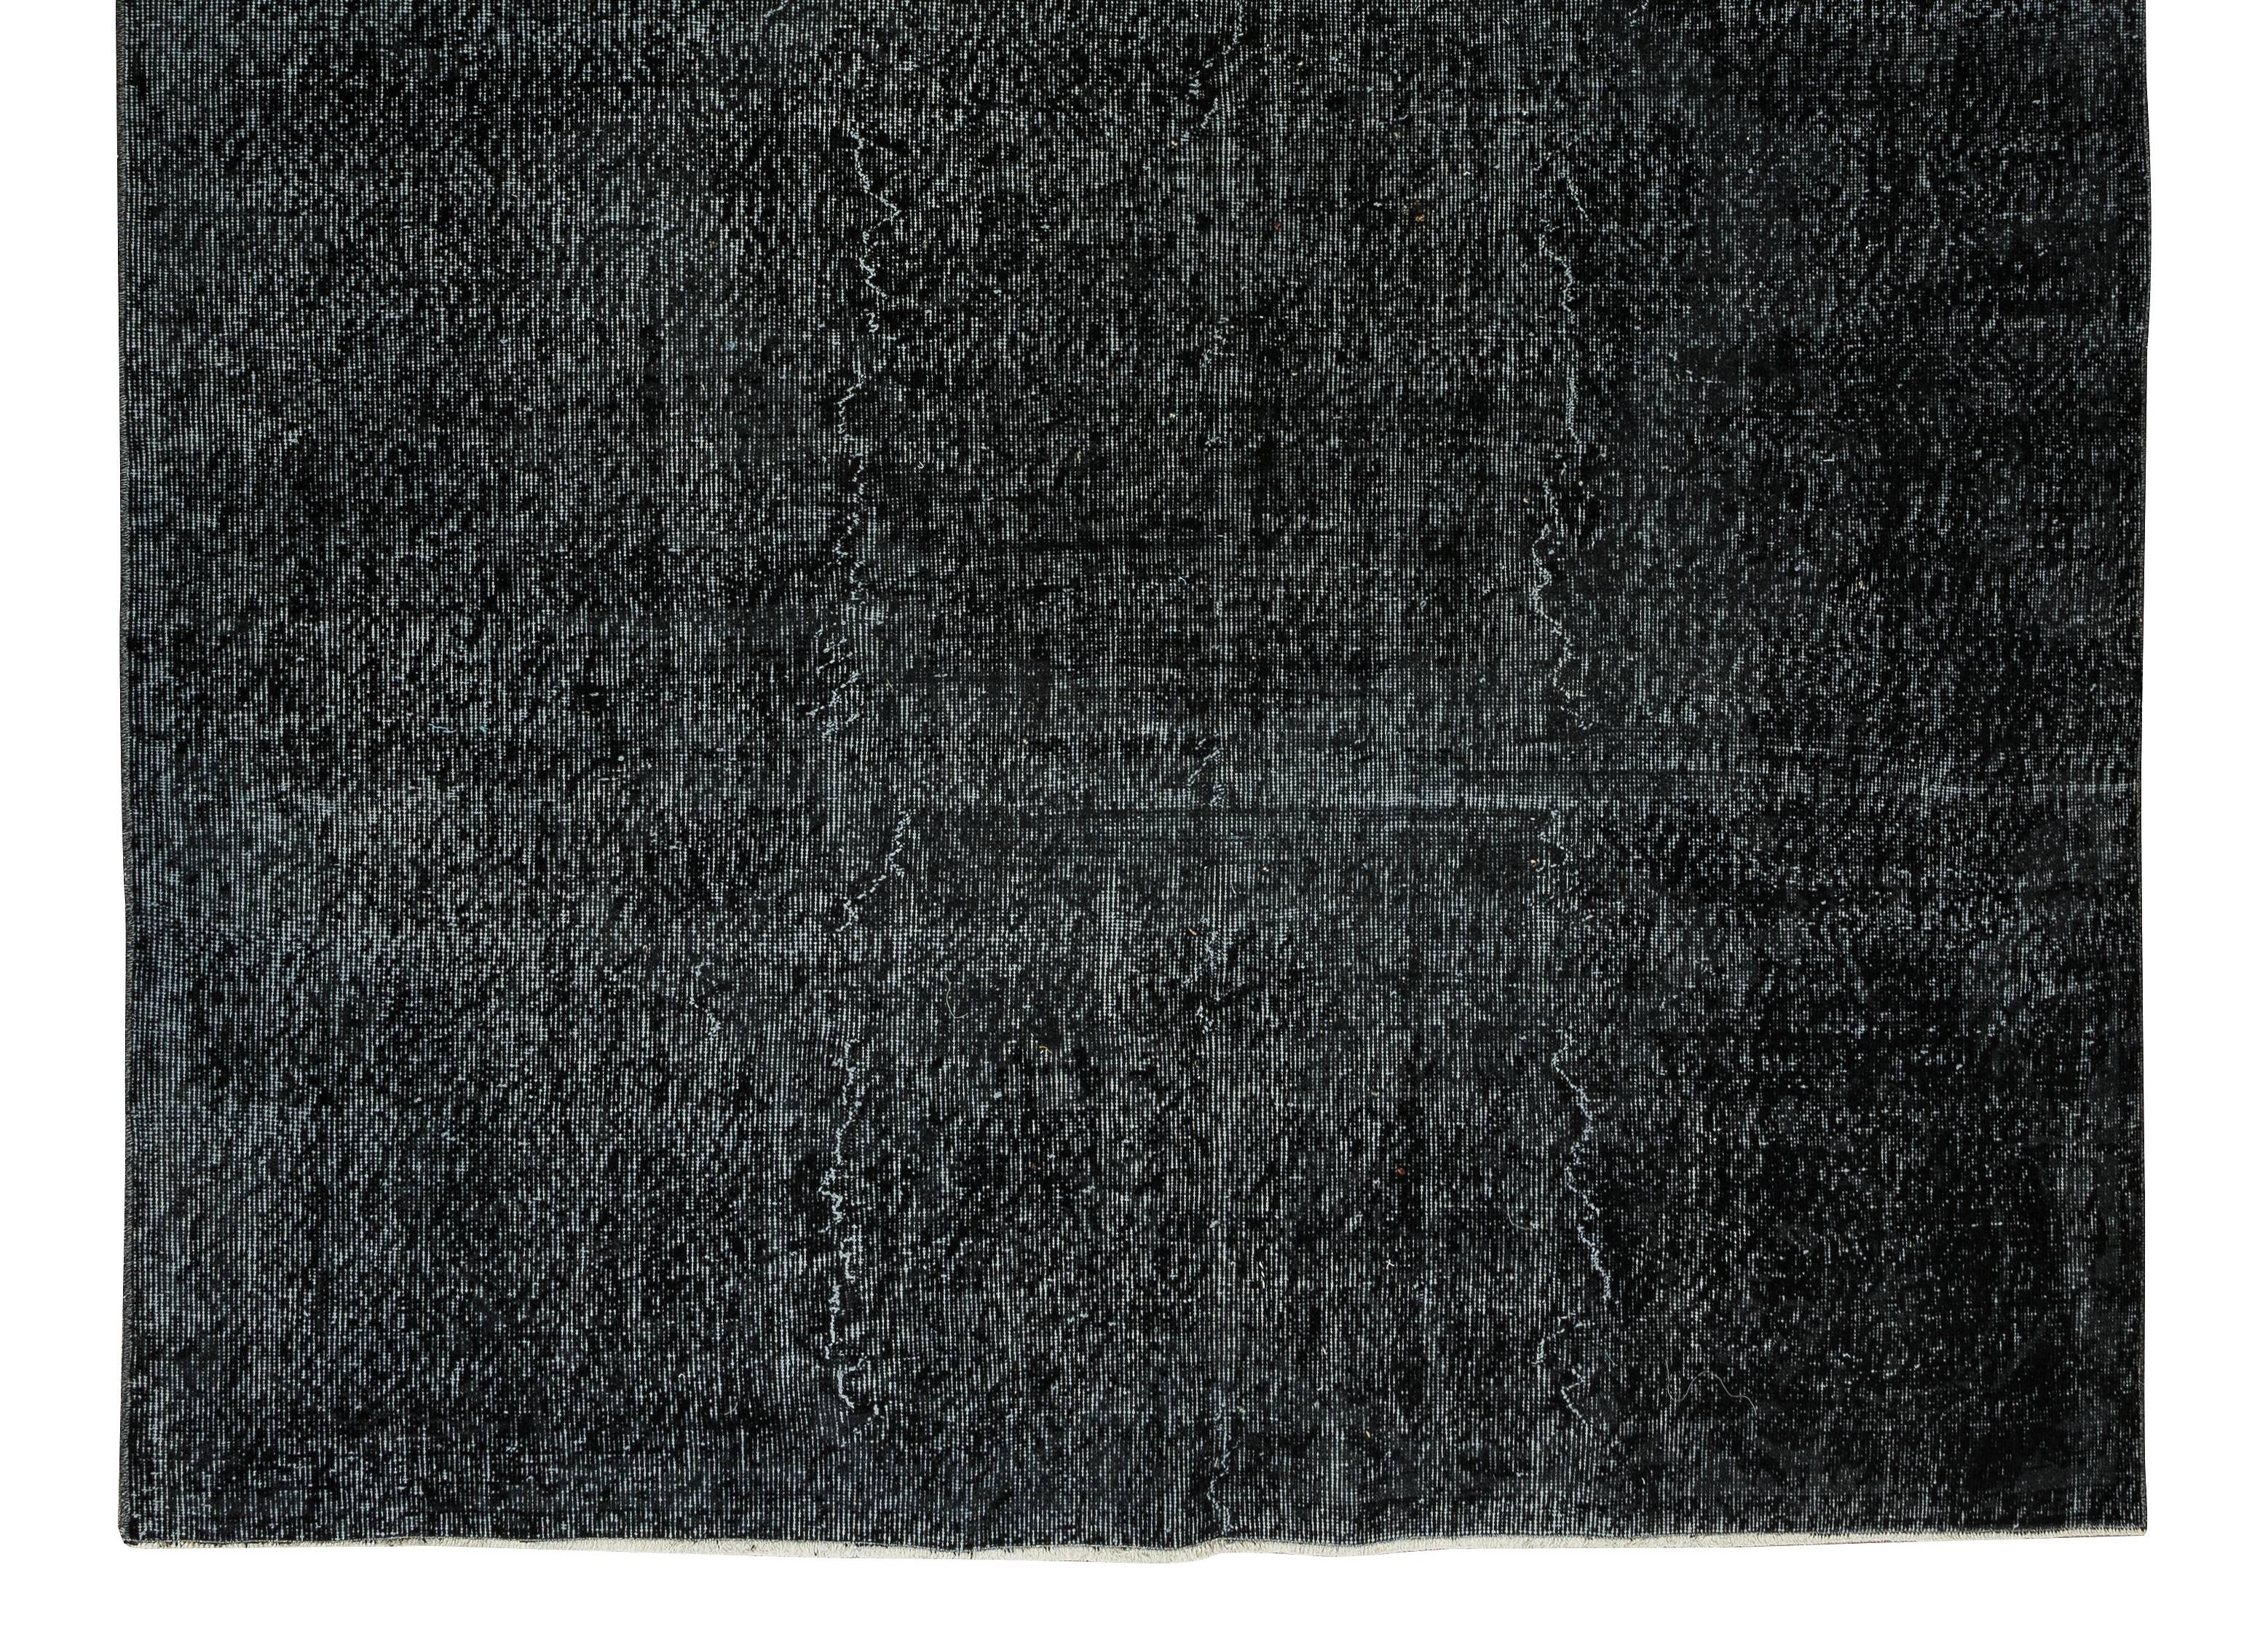 20th Century 6.4x9.6 Ft Handmade Vintage Turkish Area Rug Re-Dyed in Black 4 Modern Interiors For Sale